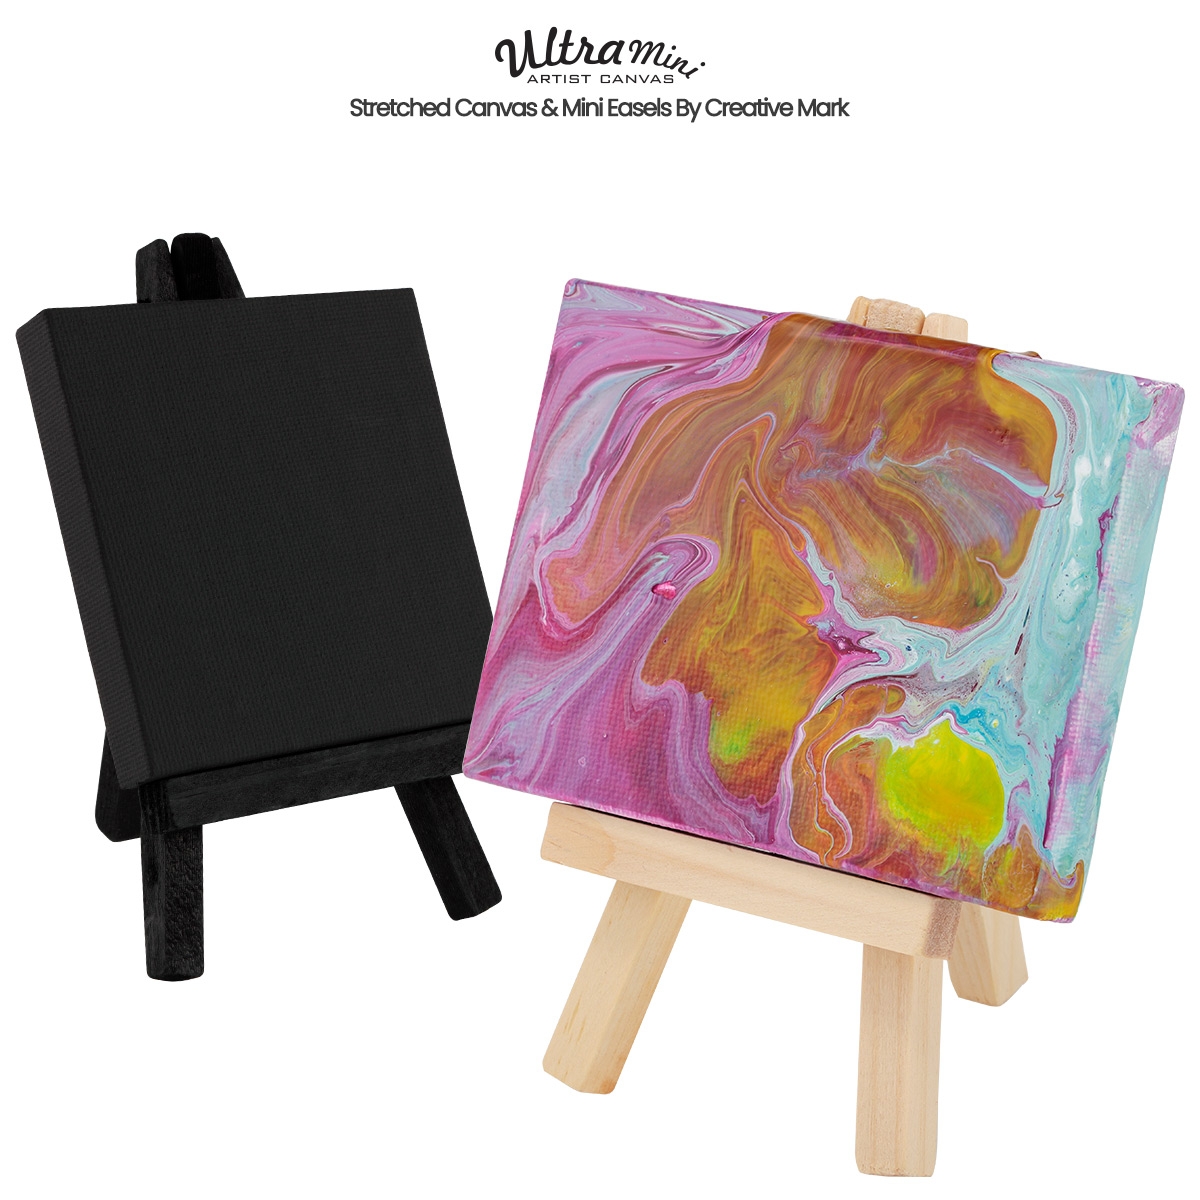 Creative Mark Ultra Mini Stretched Canvas And Easels